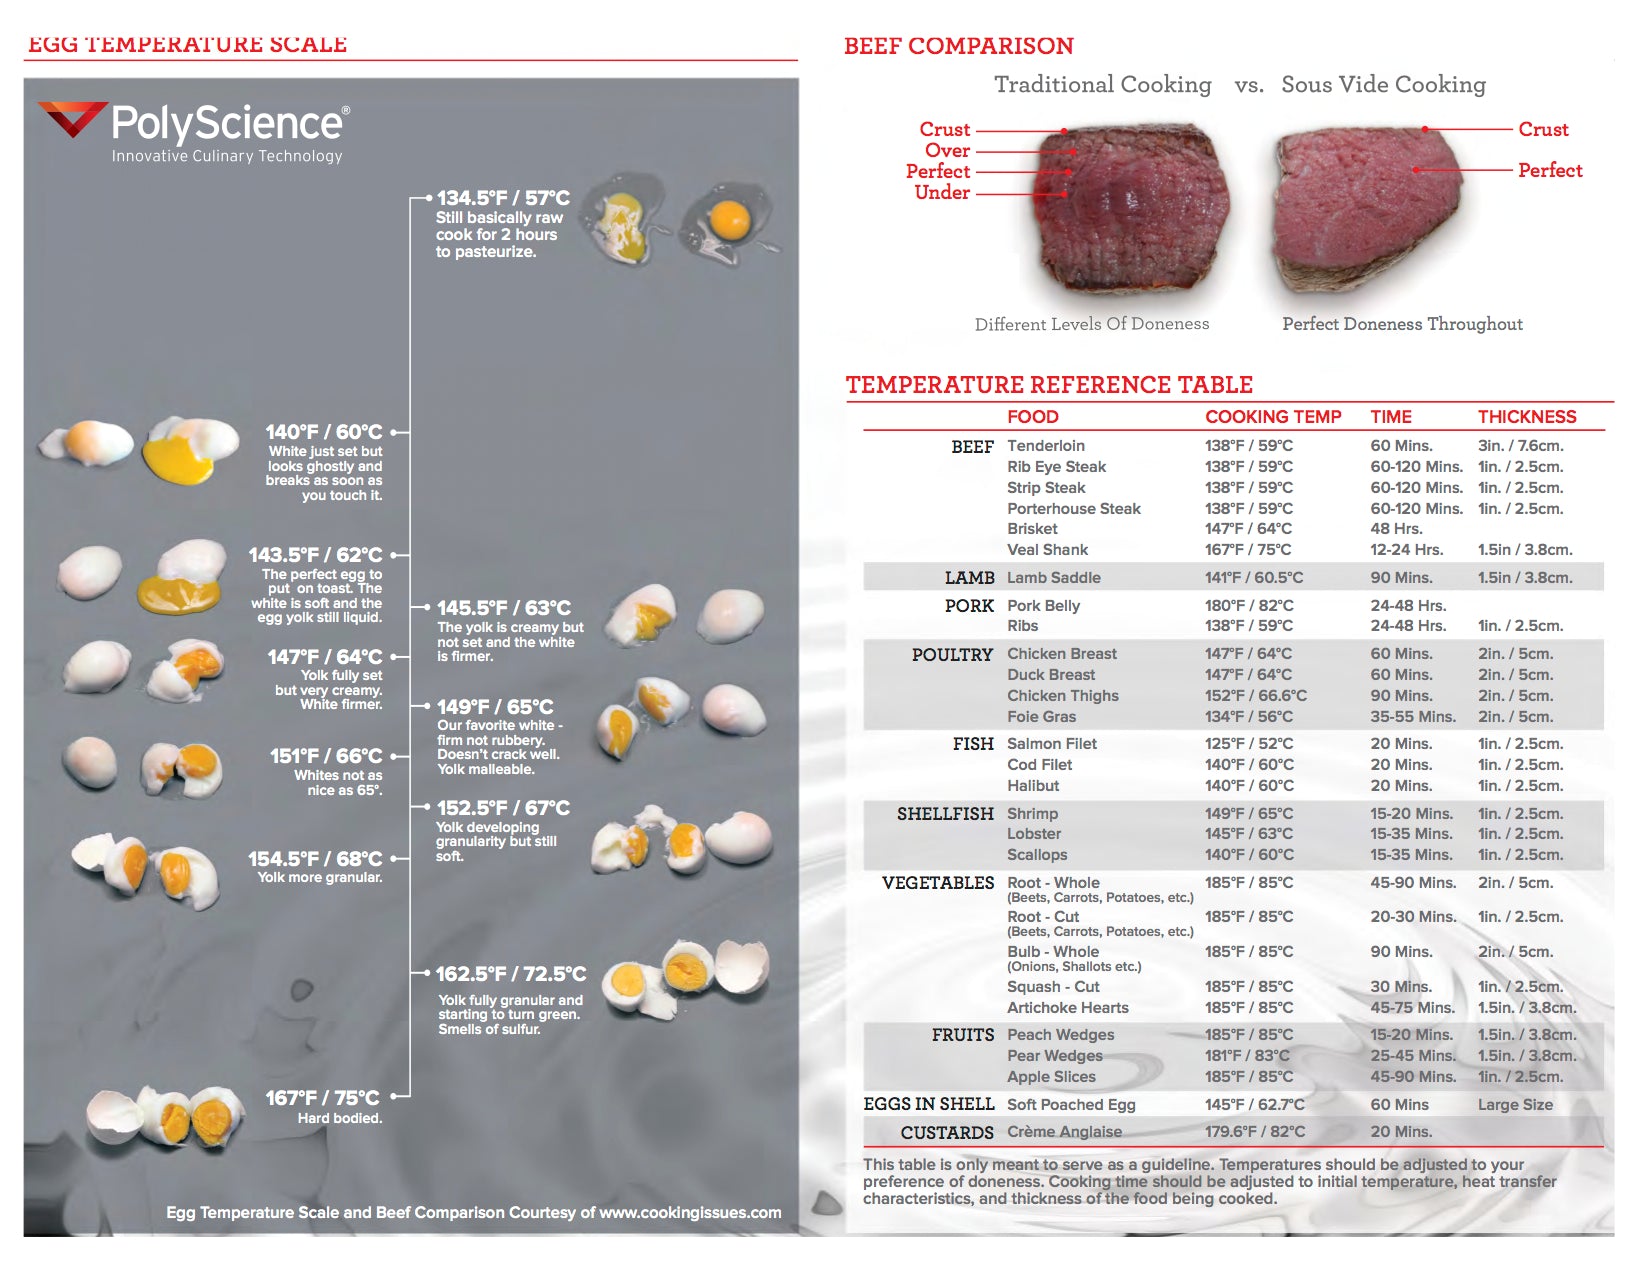 Sous Vide Food Safety Chart